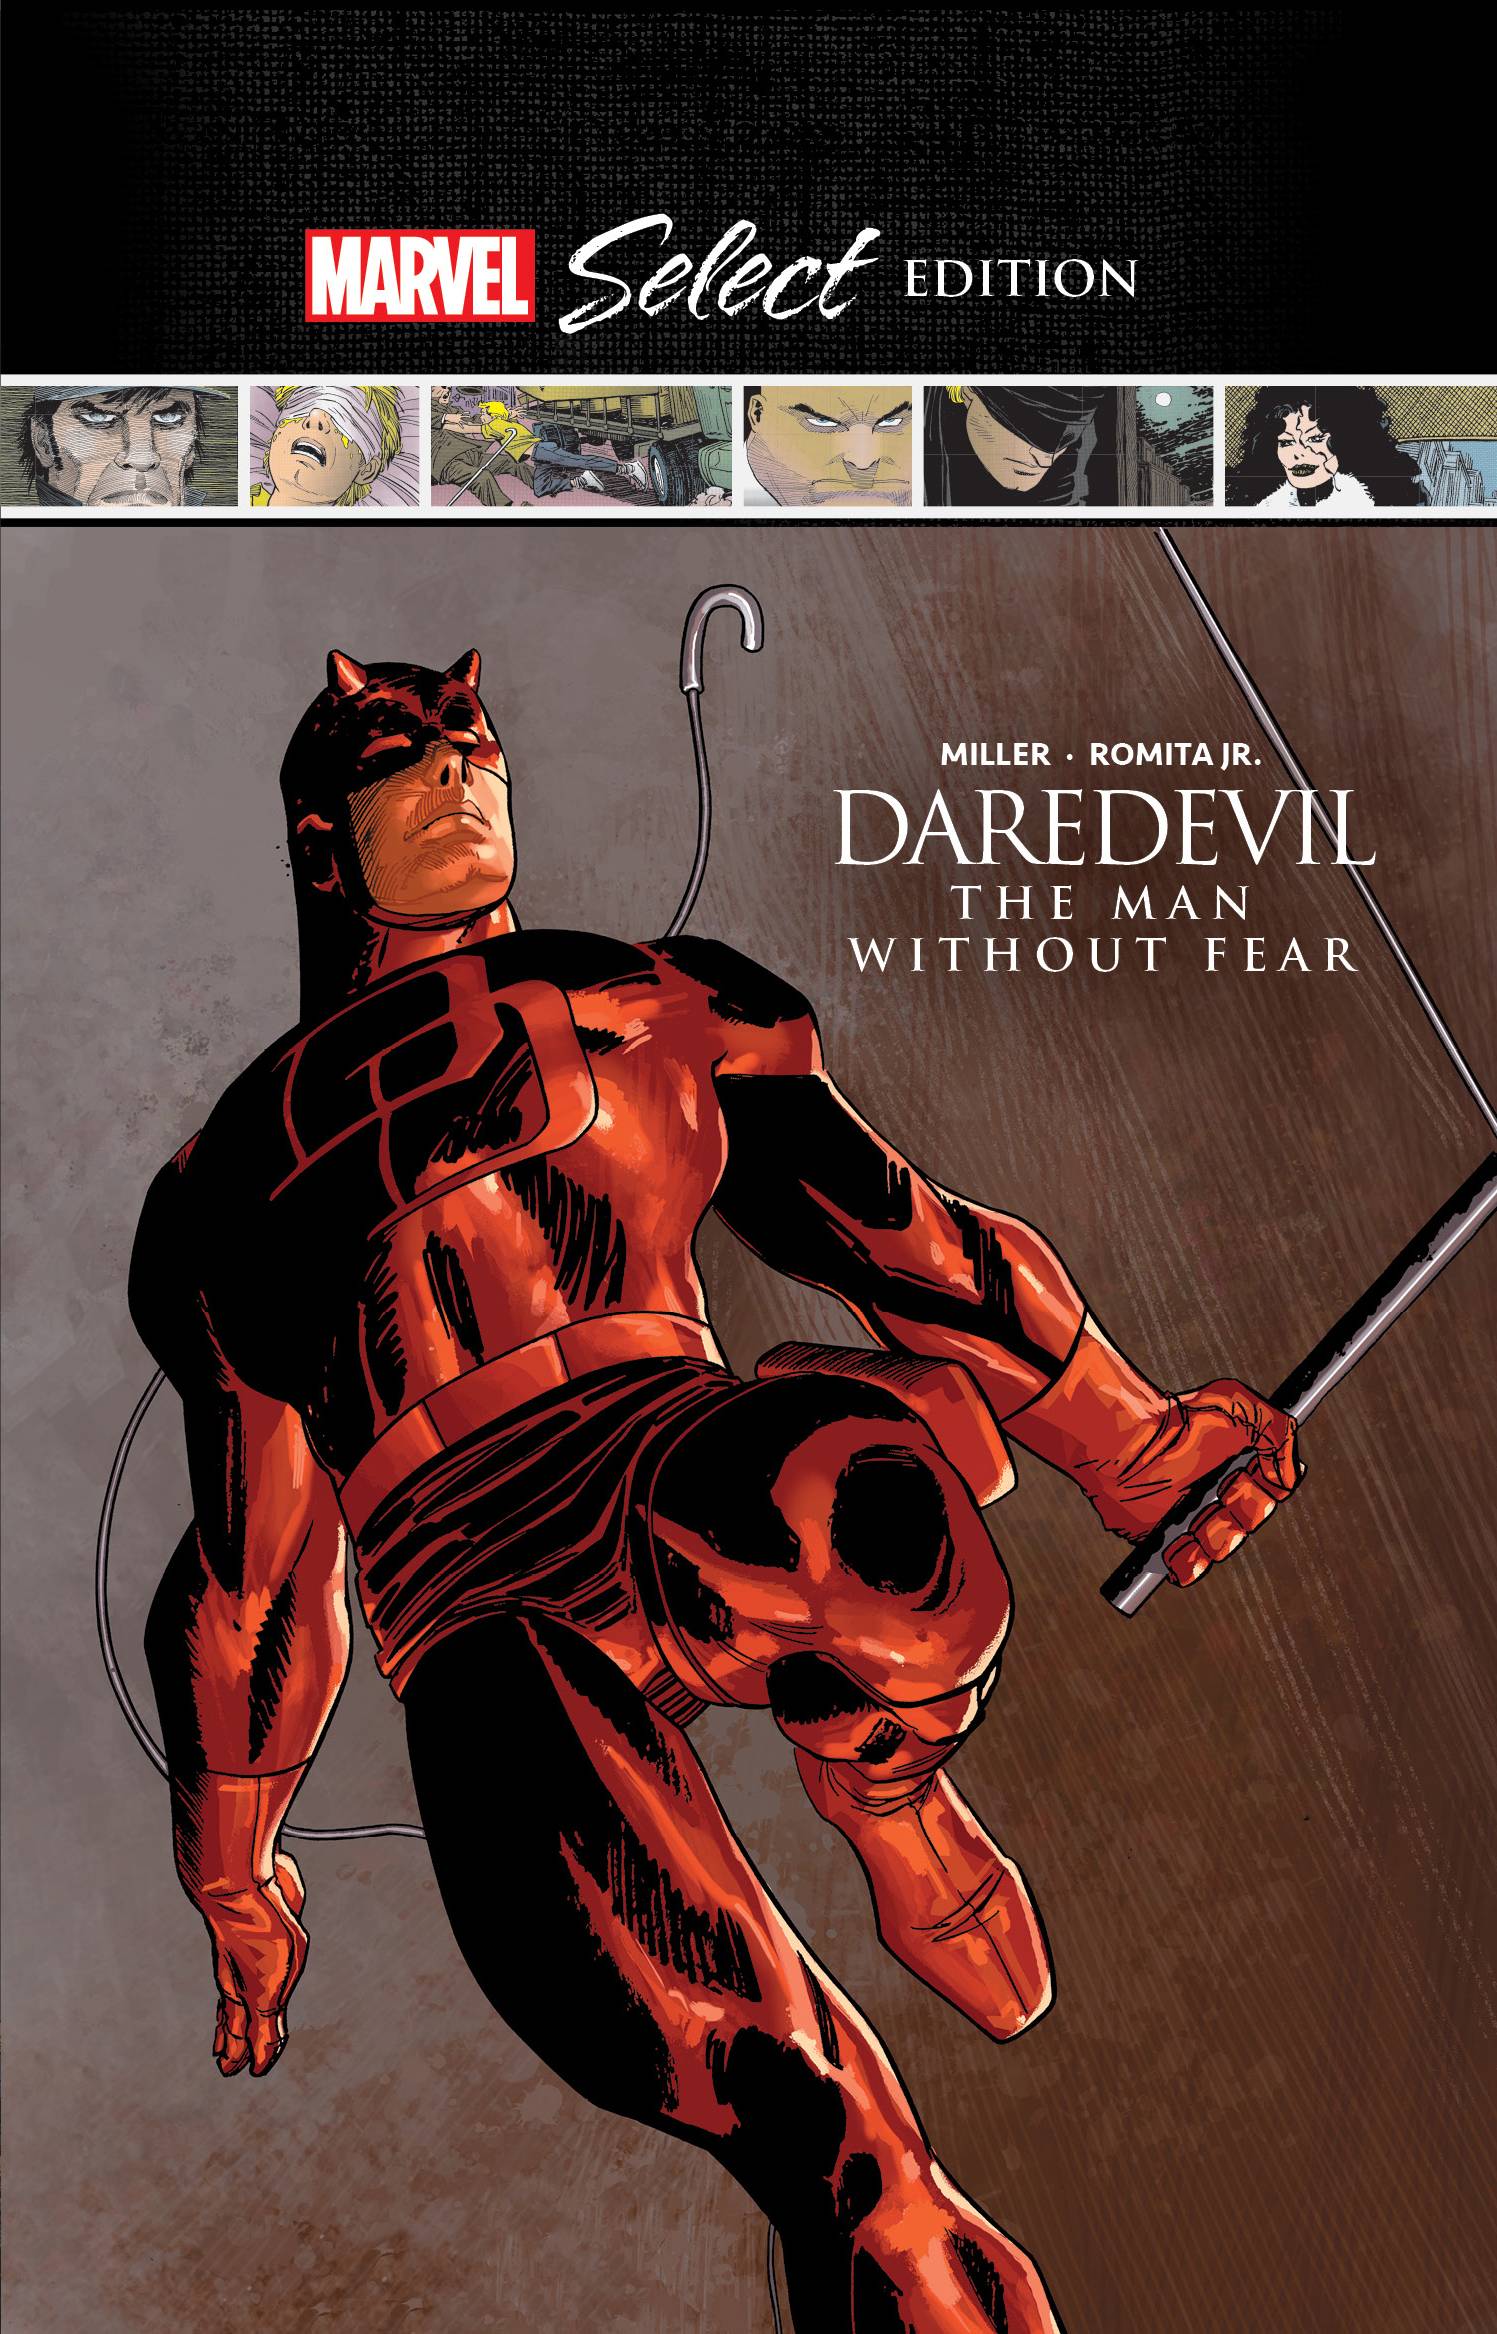 Daredevil Hardcover Man Without Fear Marvel Select